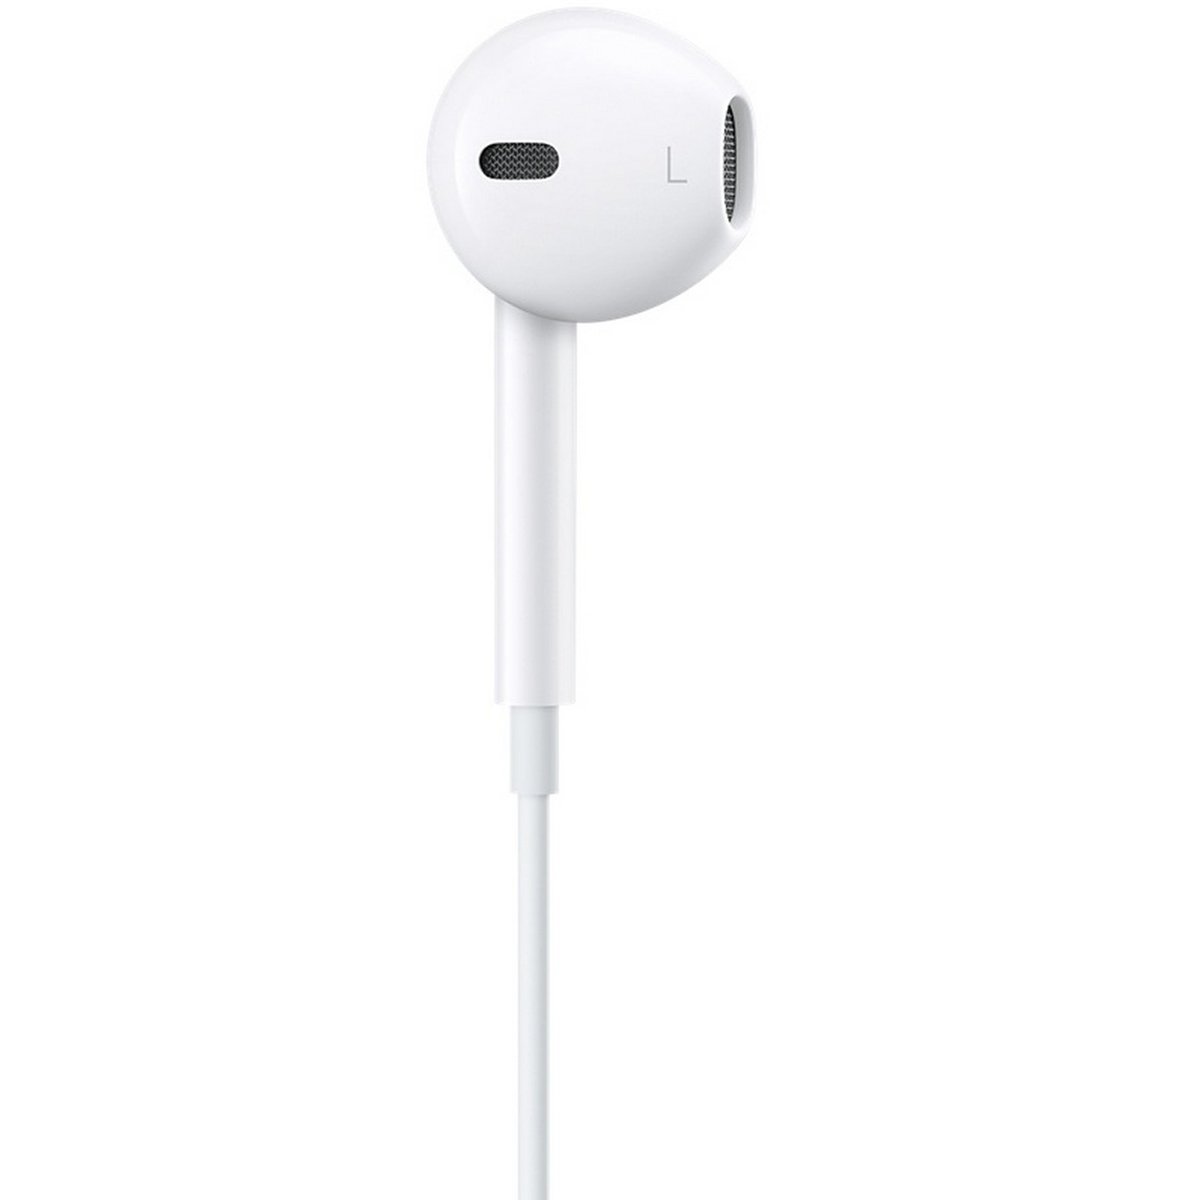 White Apple EarPods with Lightning Connector Imported Original